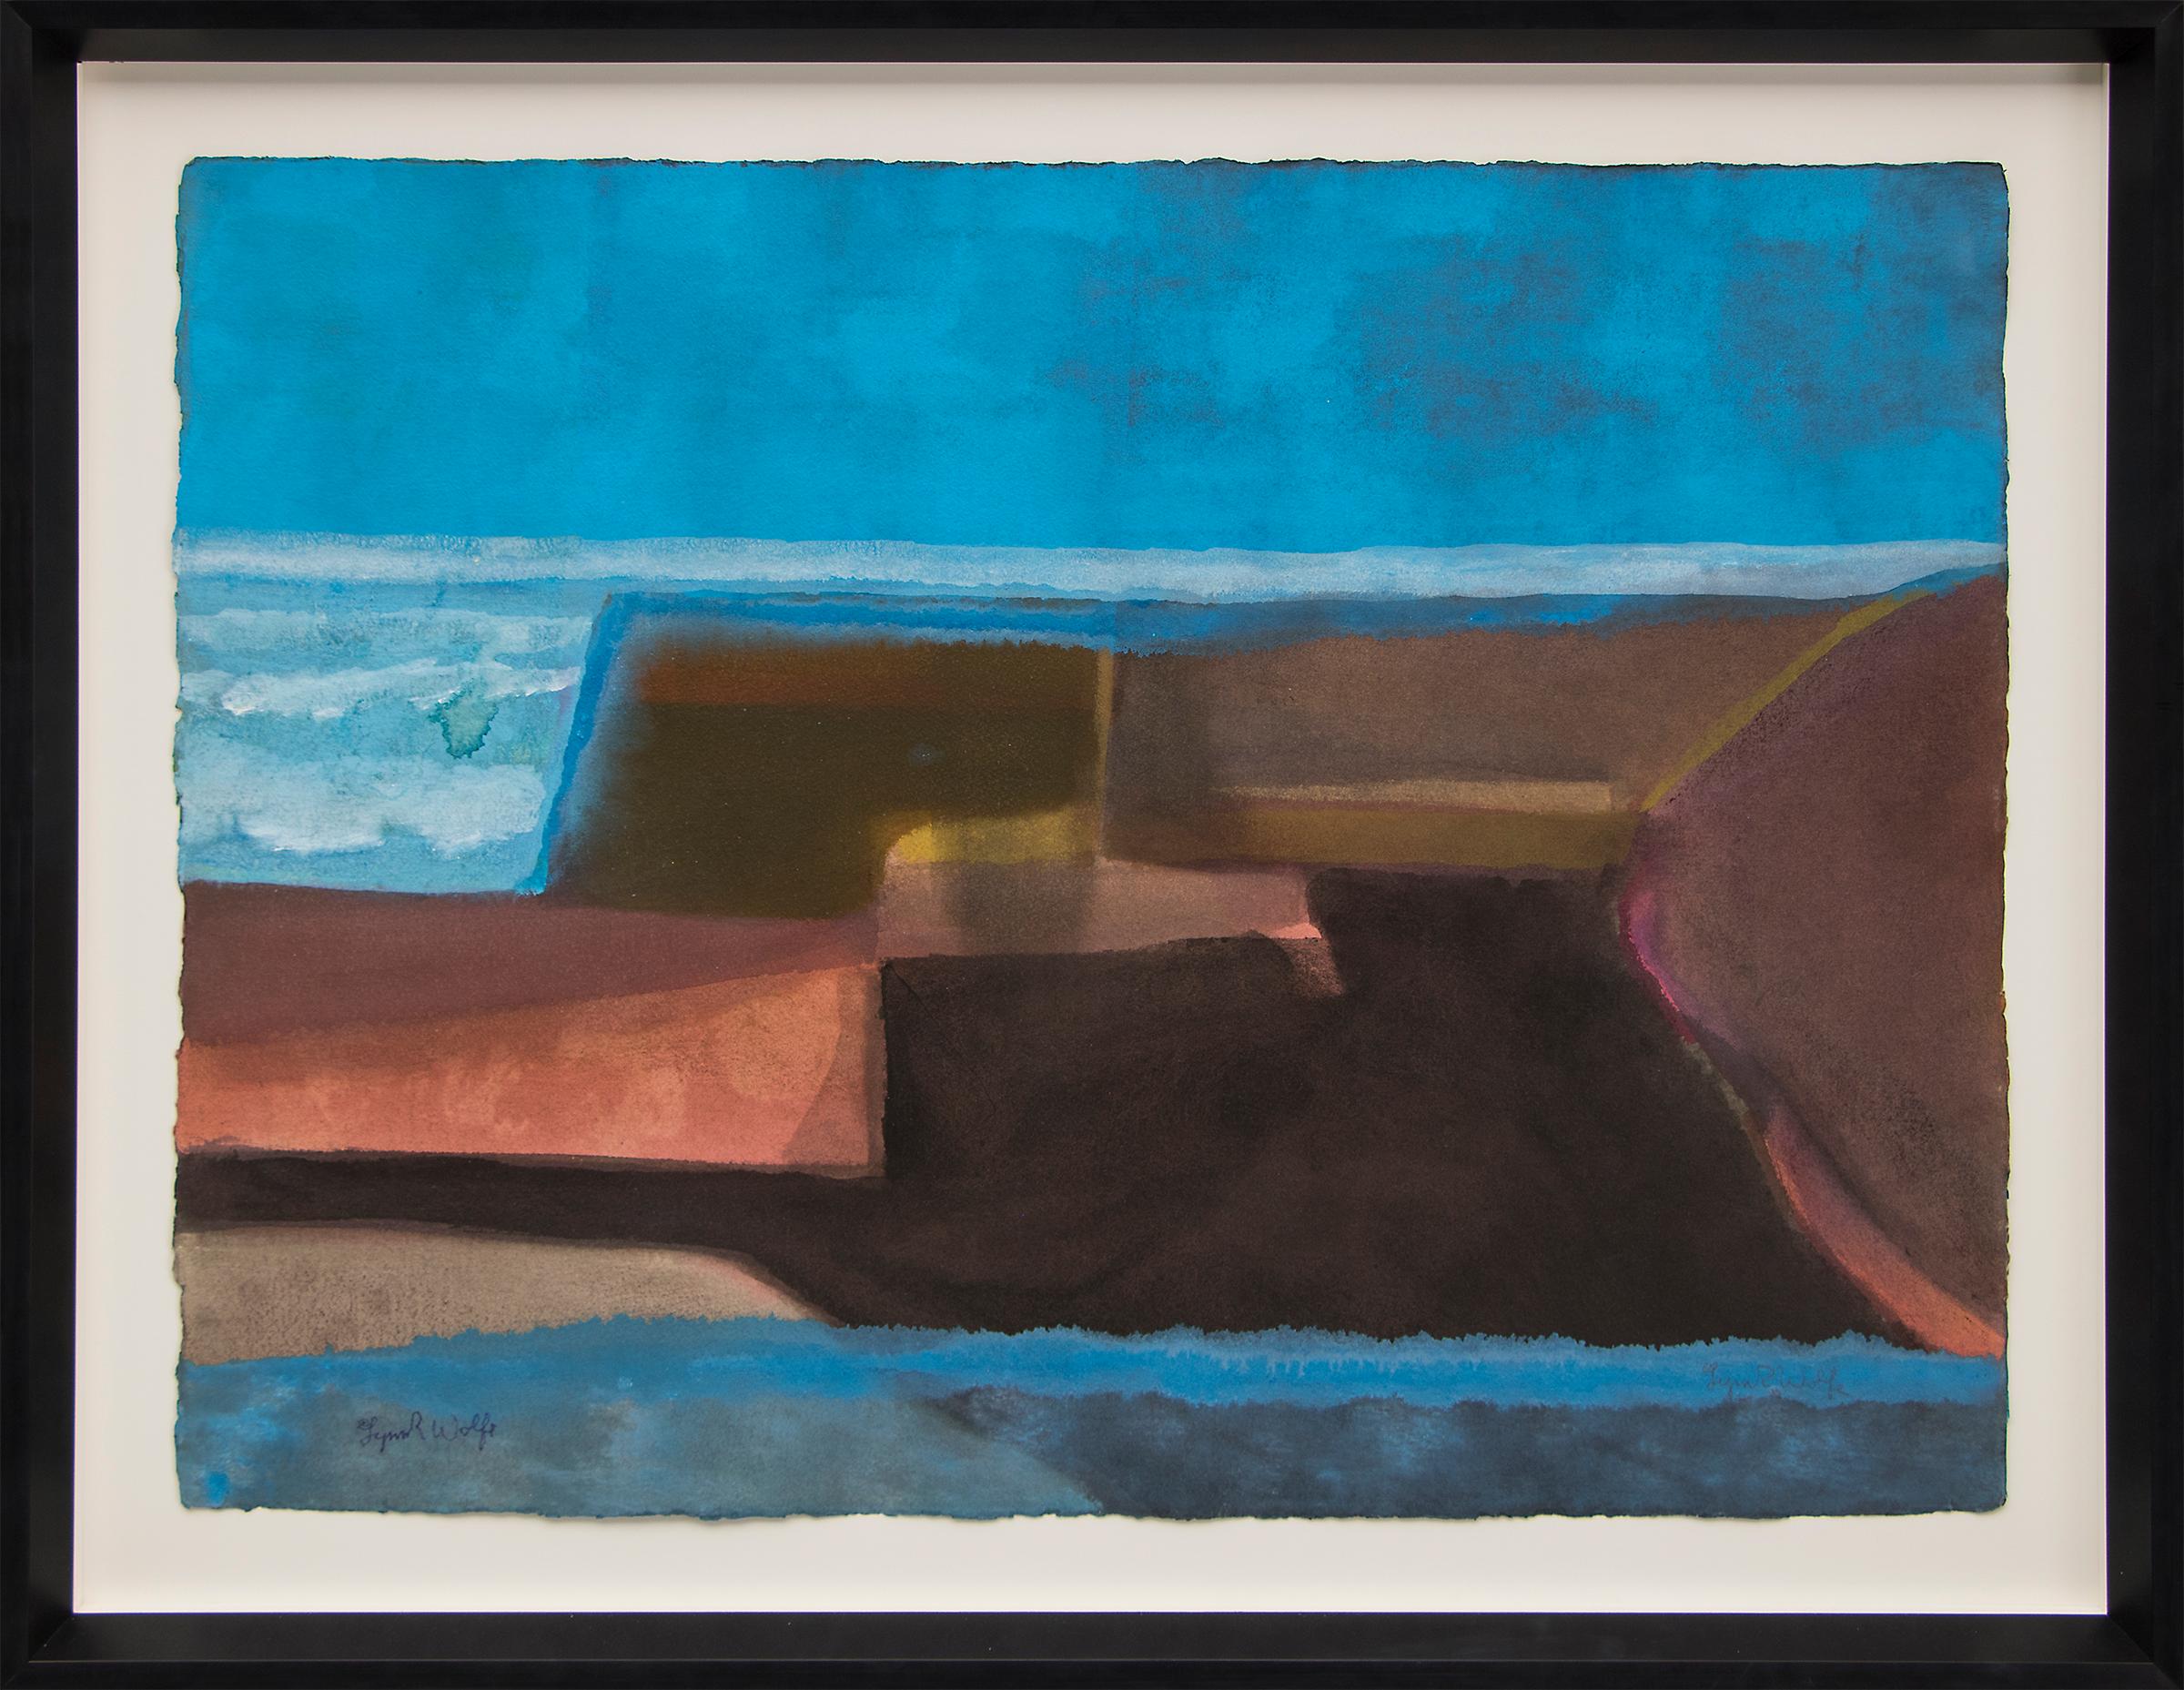 Original abstract painting by 20th century Colorado artist, Lynn Wolfe (1917-2019).  Abstract composition in painted with watercolor in colors of blue, brown, reddish/pink-purple, and yellow. Presented in a custom hardwood frame with all archival